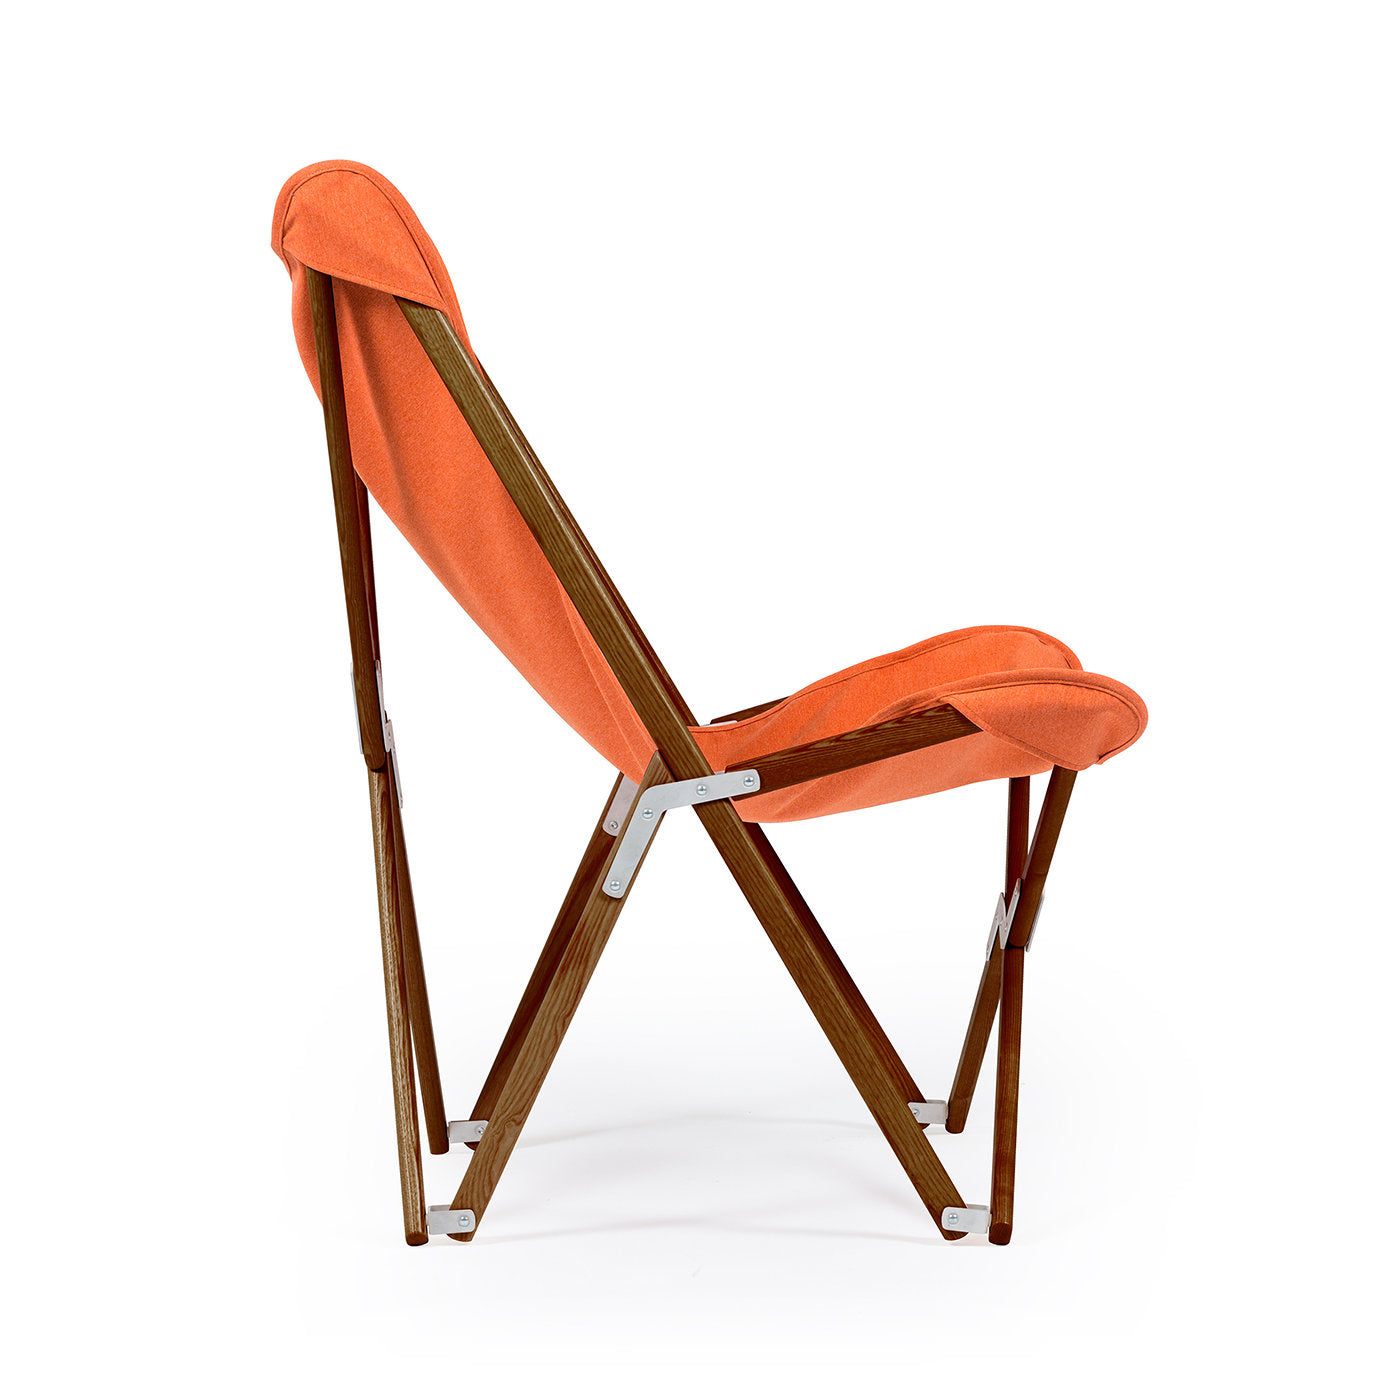 Tripolina Chair in Terracotta Red - Alternative view 2